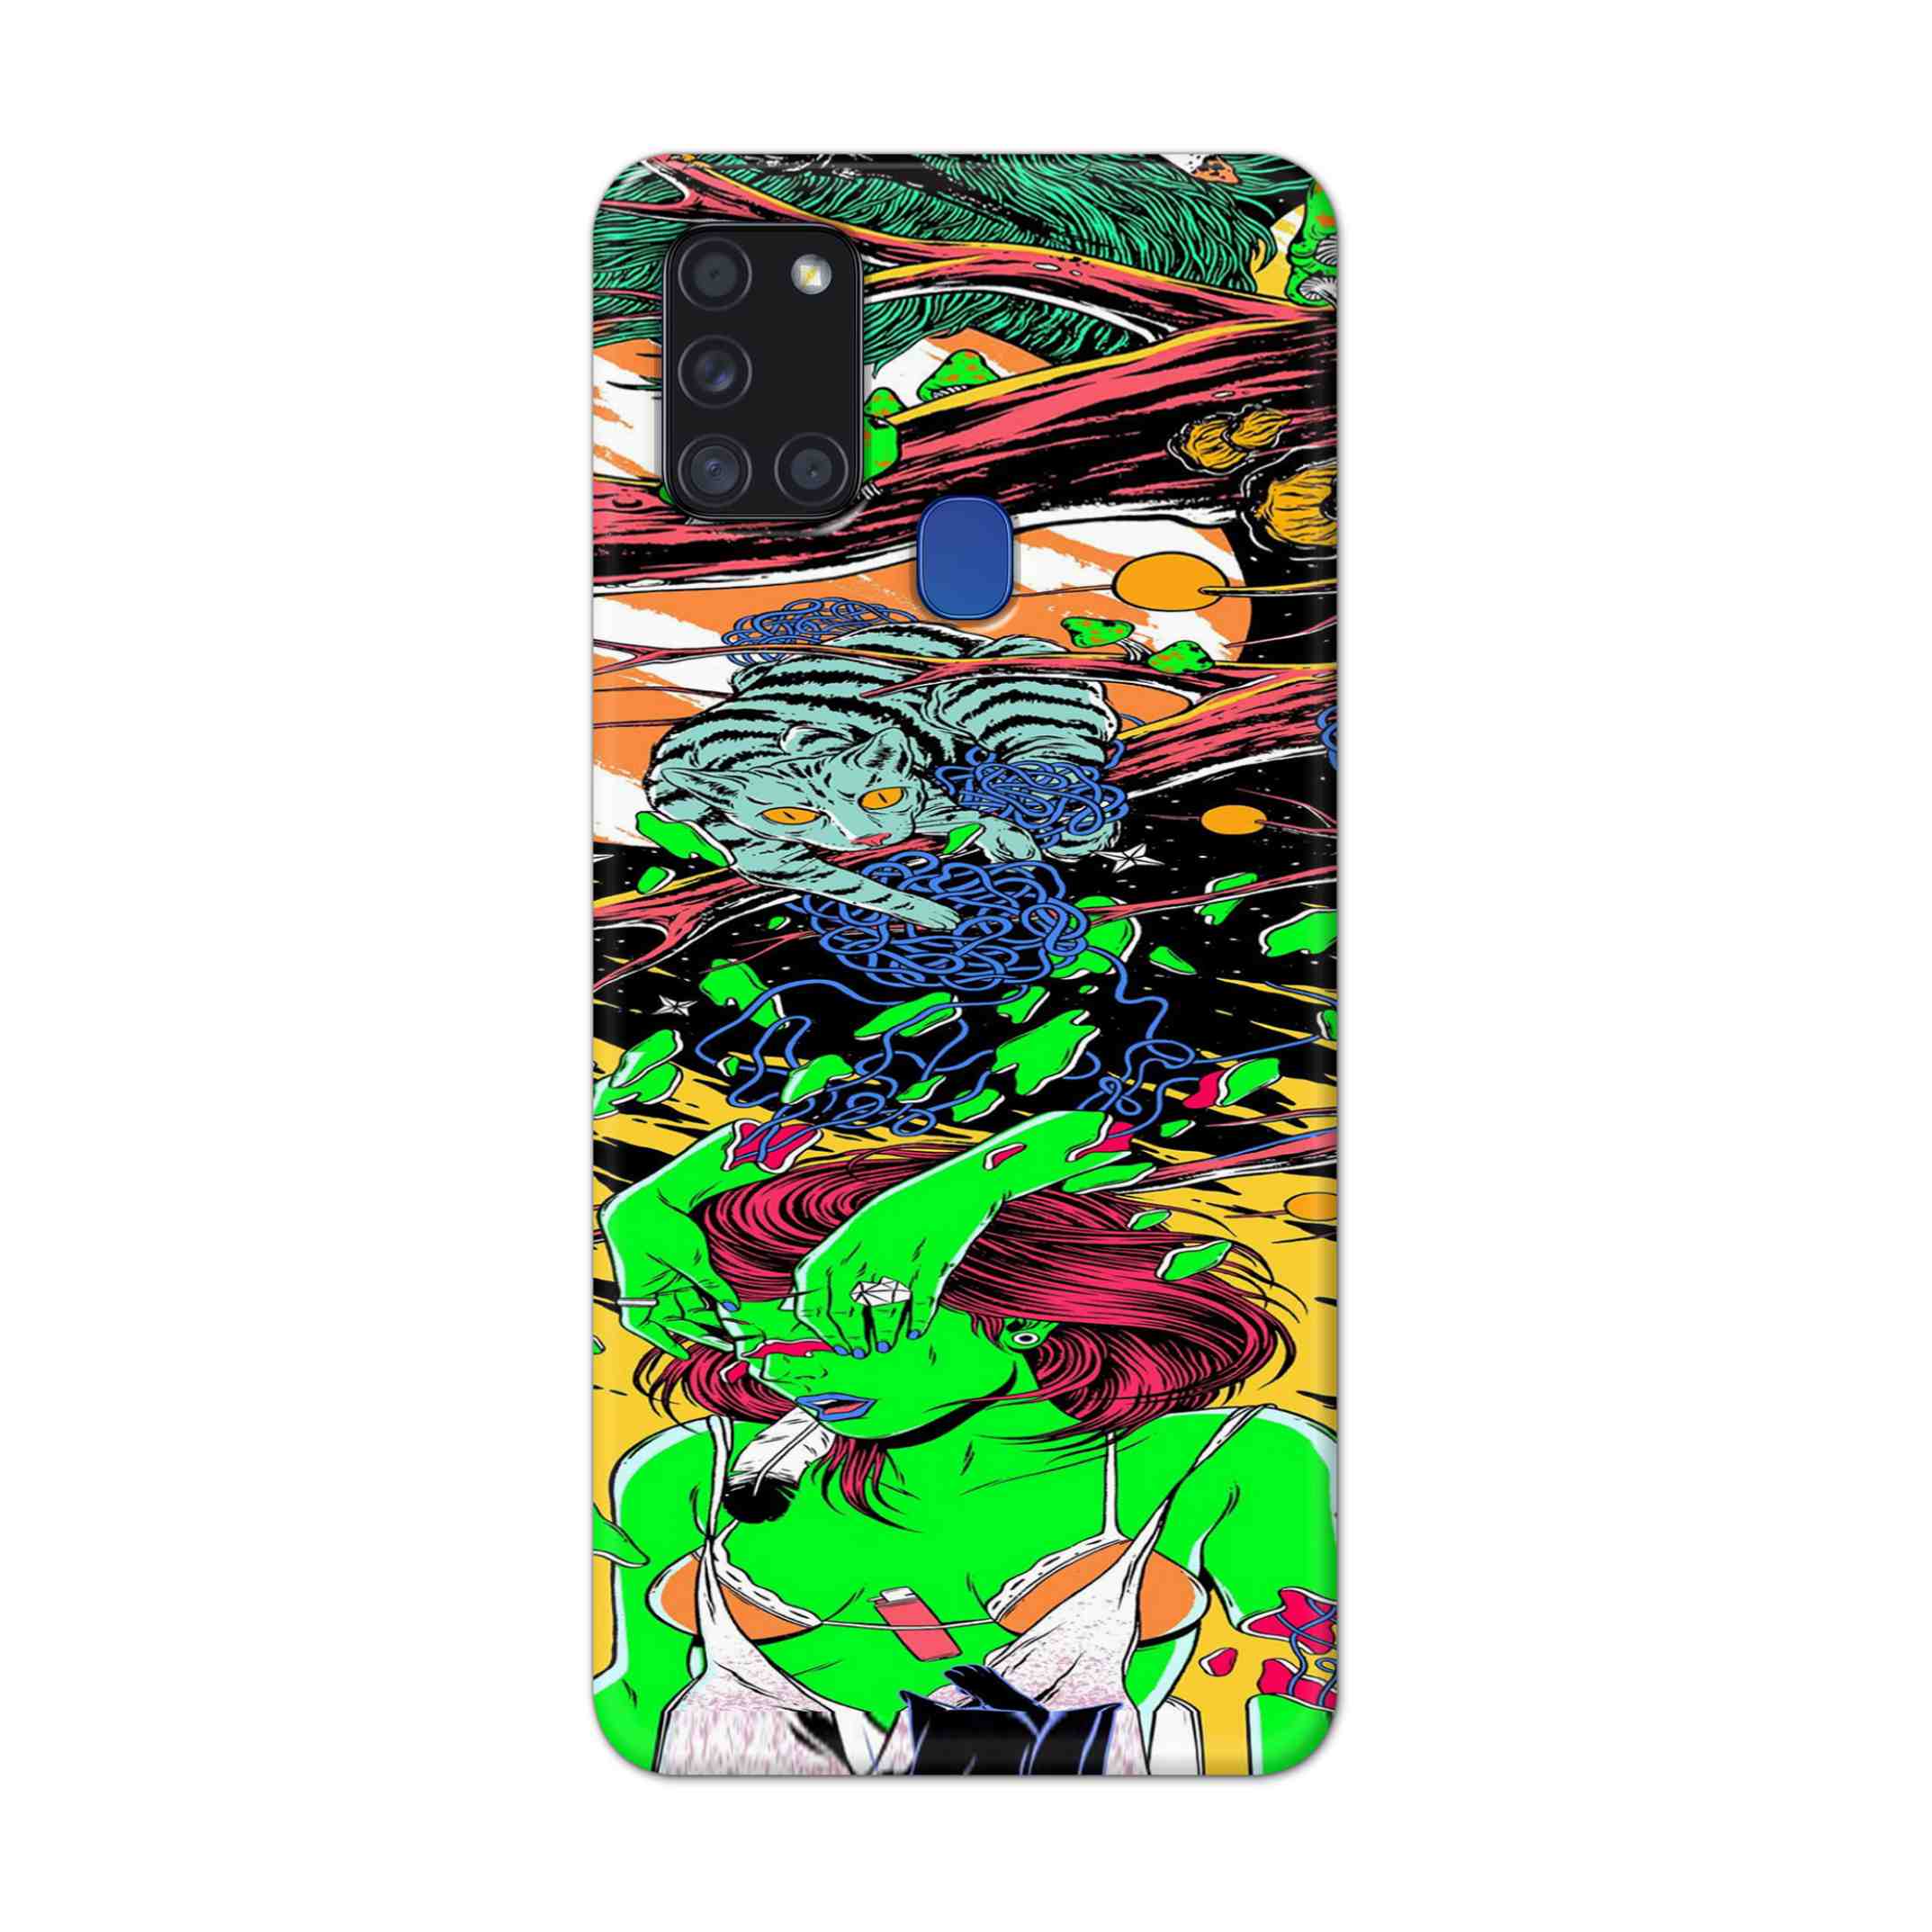 Buy Green Girl Art Hard Back Mobile Phone Case Cover For Samsung Galaxy A21s Online